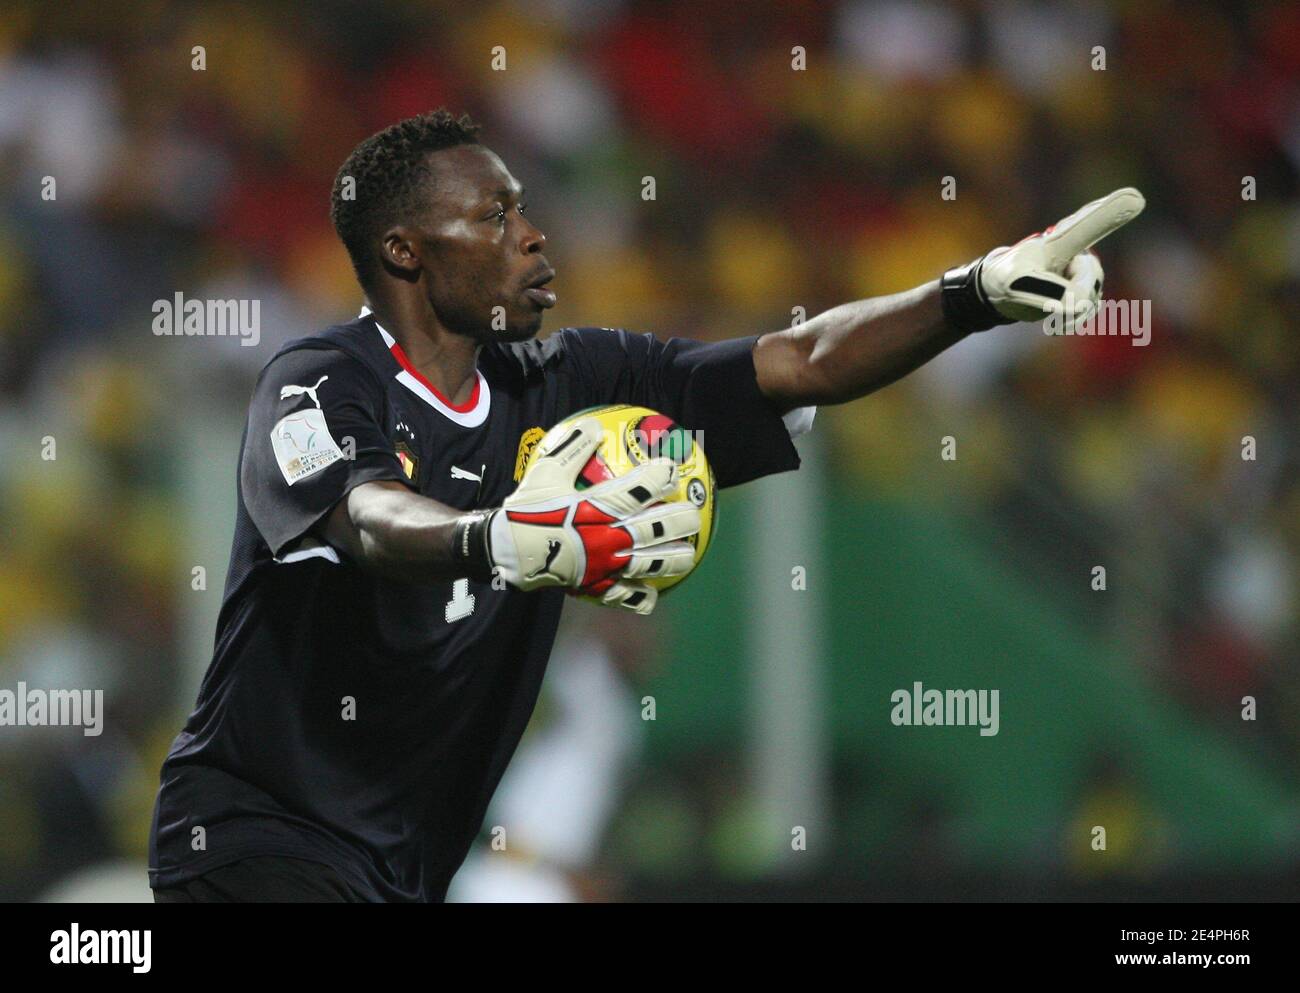 Cameroon's goalkeeper Carlos Kameni Idris during the African Cup of Nations Semi Final soccer match, Ghana vs Cameroon in Accra, Ghana on February 7, 2008. Cameroon are only one step away from a record-equalling fifth African Nations Cup title after wrecking Ghana's party with a 1-0 semi-final win over the hosts. Photo by Steeve McMay/Cameleon/ABACAPRESS.COM Stock Photo